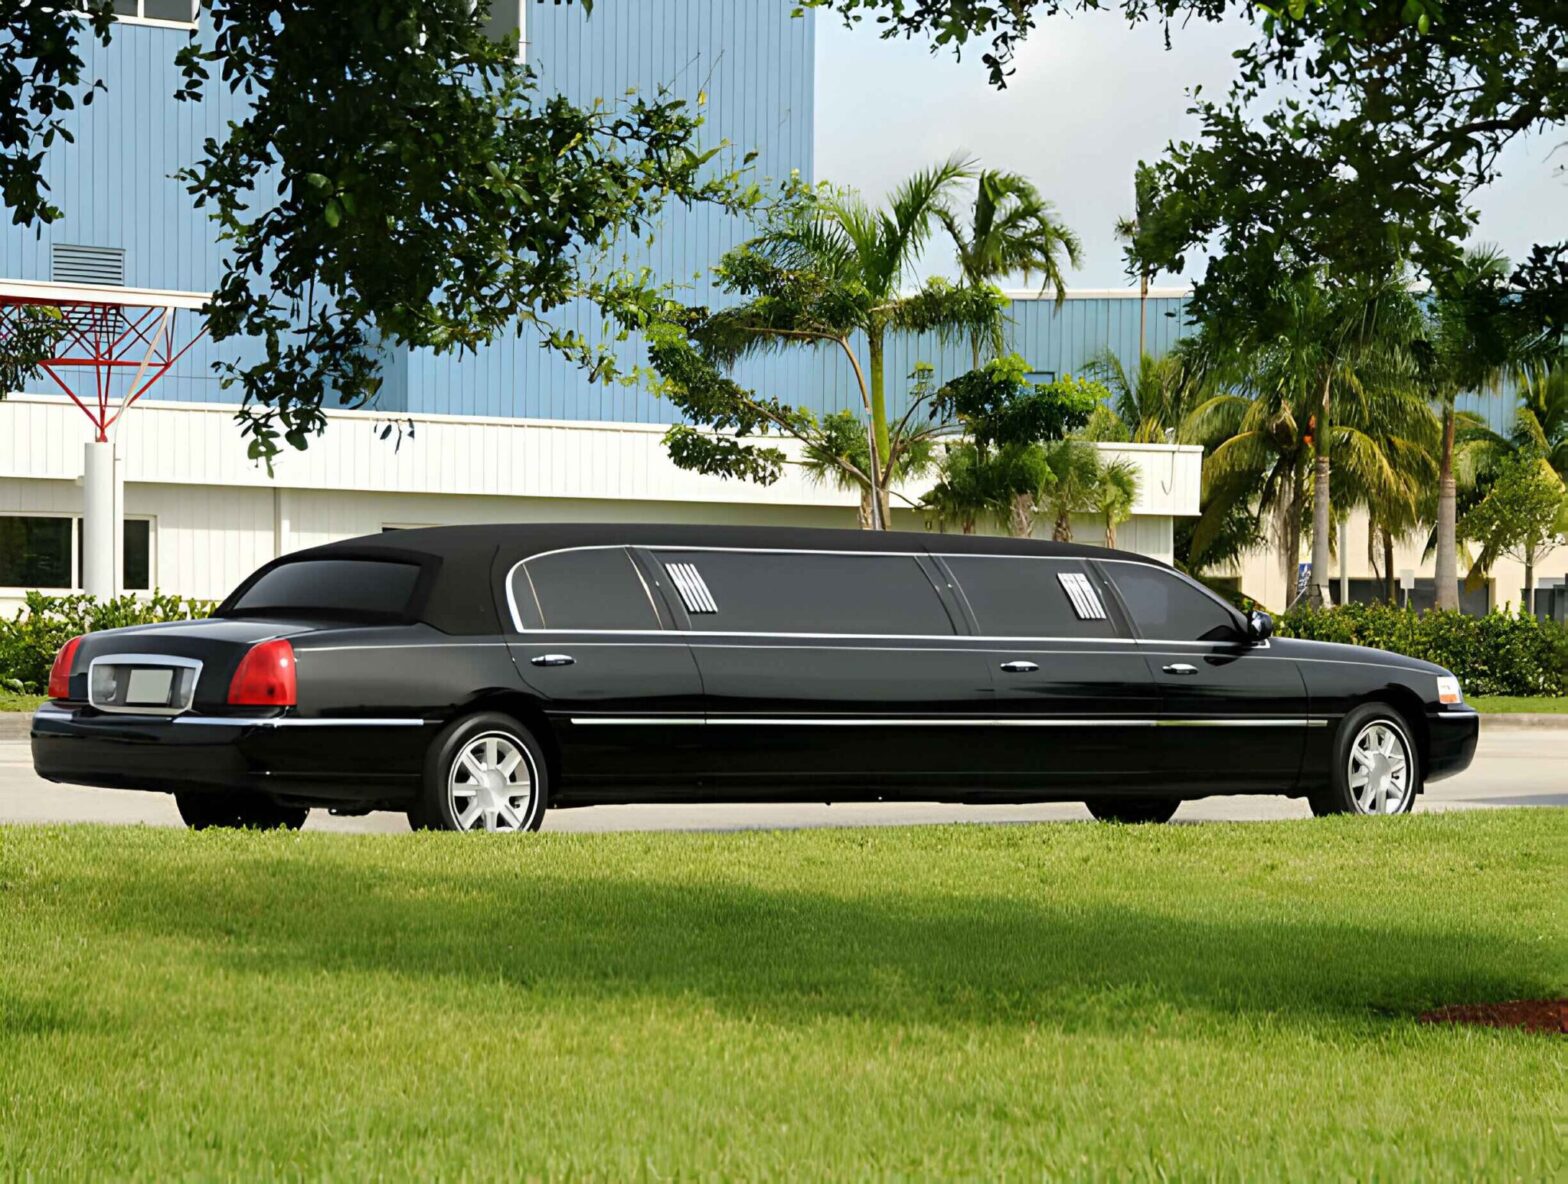 Luxury Shopping Tour Explore Chicago's Top Boutiques with Limo Car Services Chicago